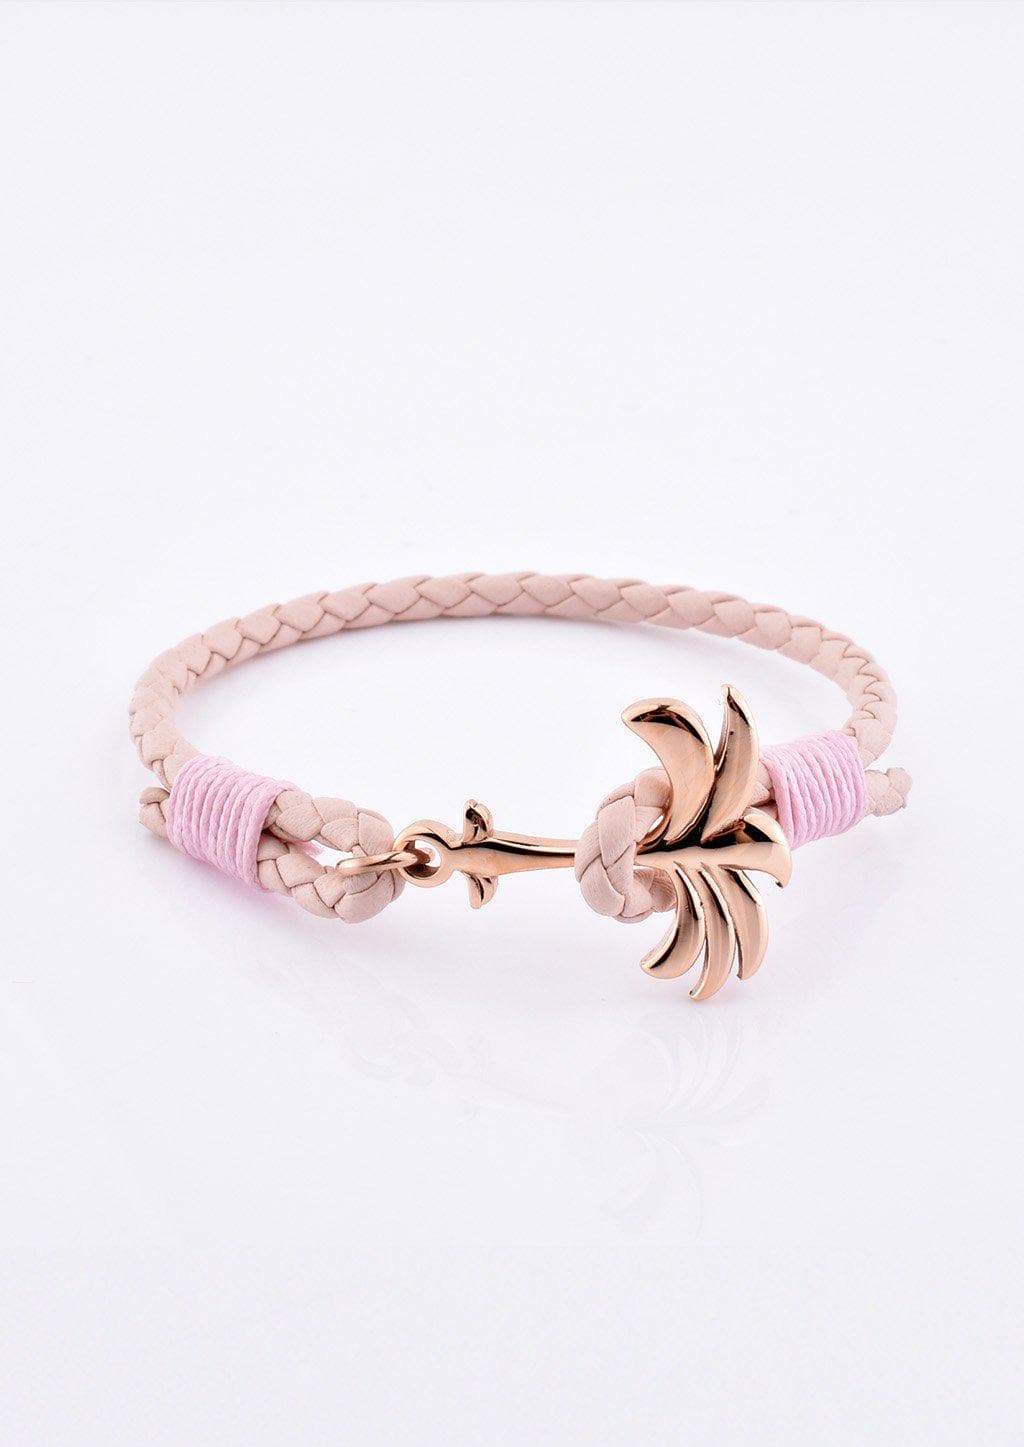 Rosette - Season two Palm anchor bracelet with pink leather.